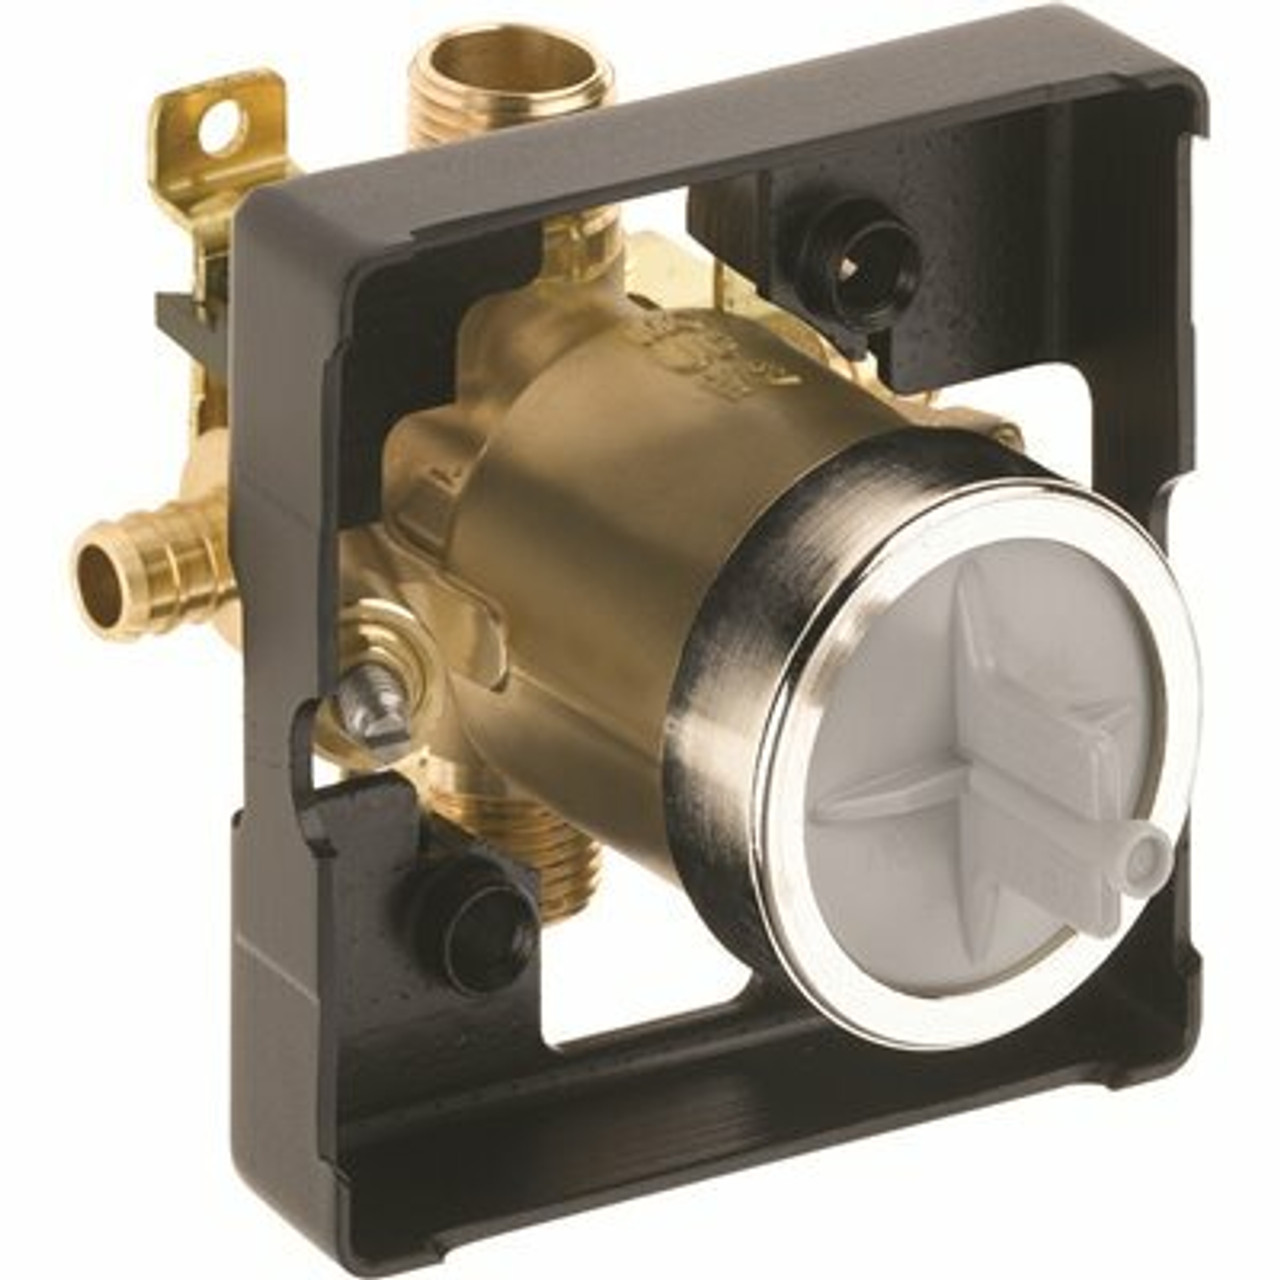 Delta Multichoice Universal Tub And Shower Valve Body Rough-In Kit With 1/2 In. Pex Crimp Connections - 100482555